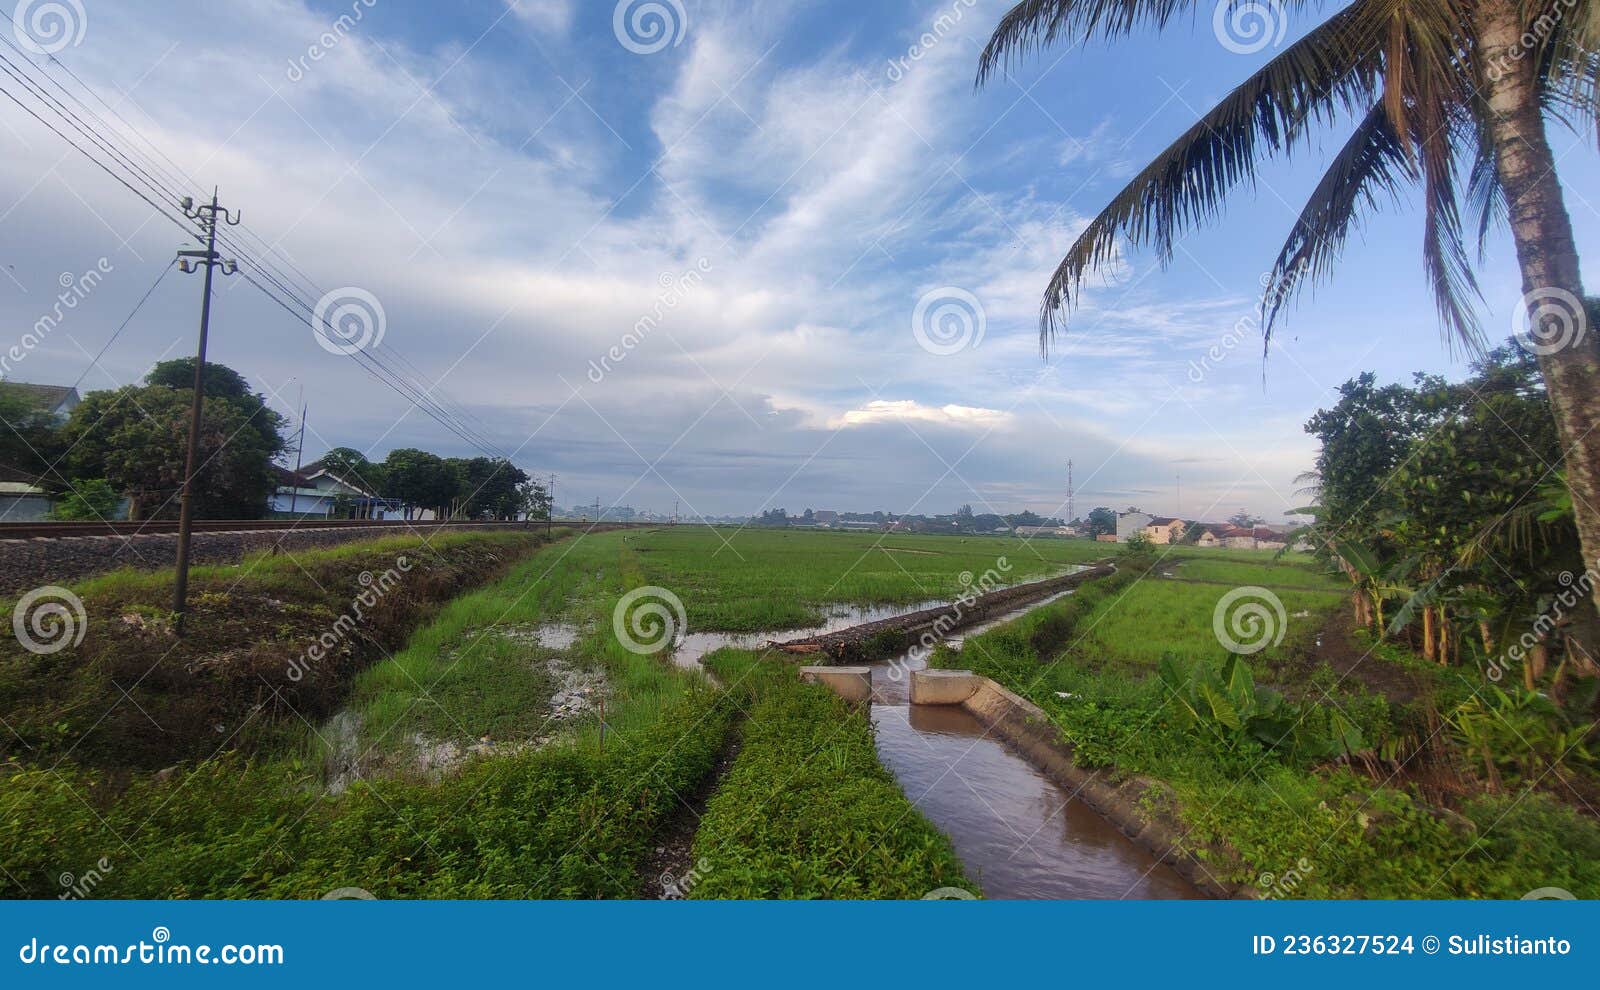 canal river that irrigates rice fields and fields